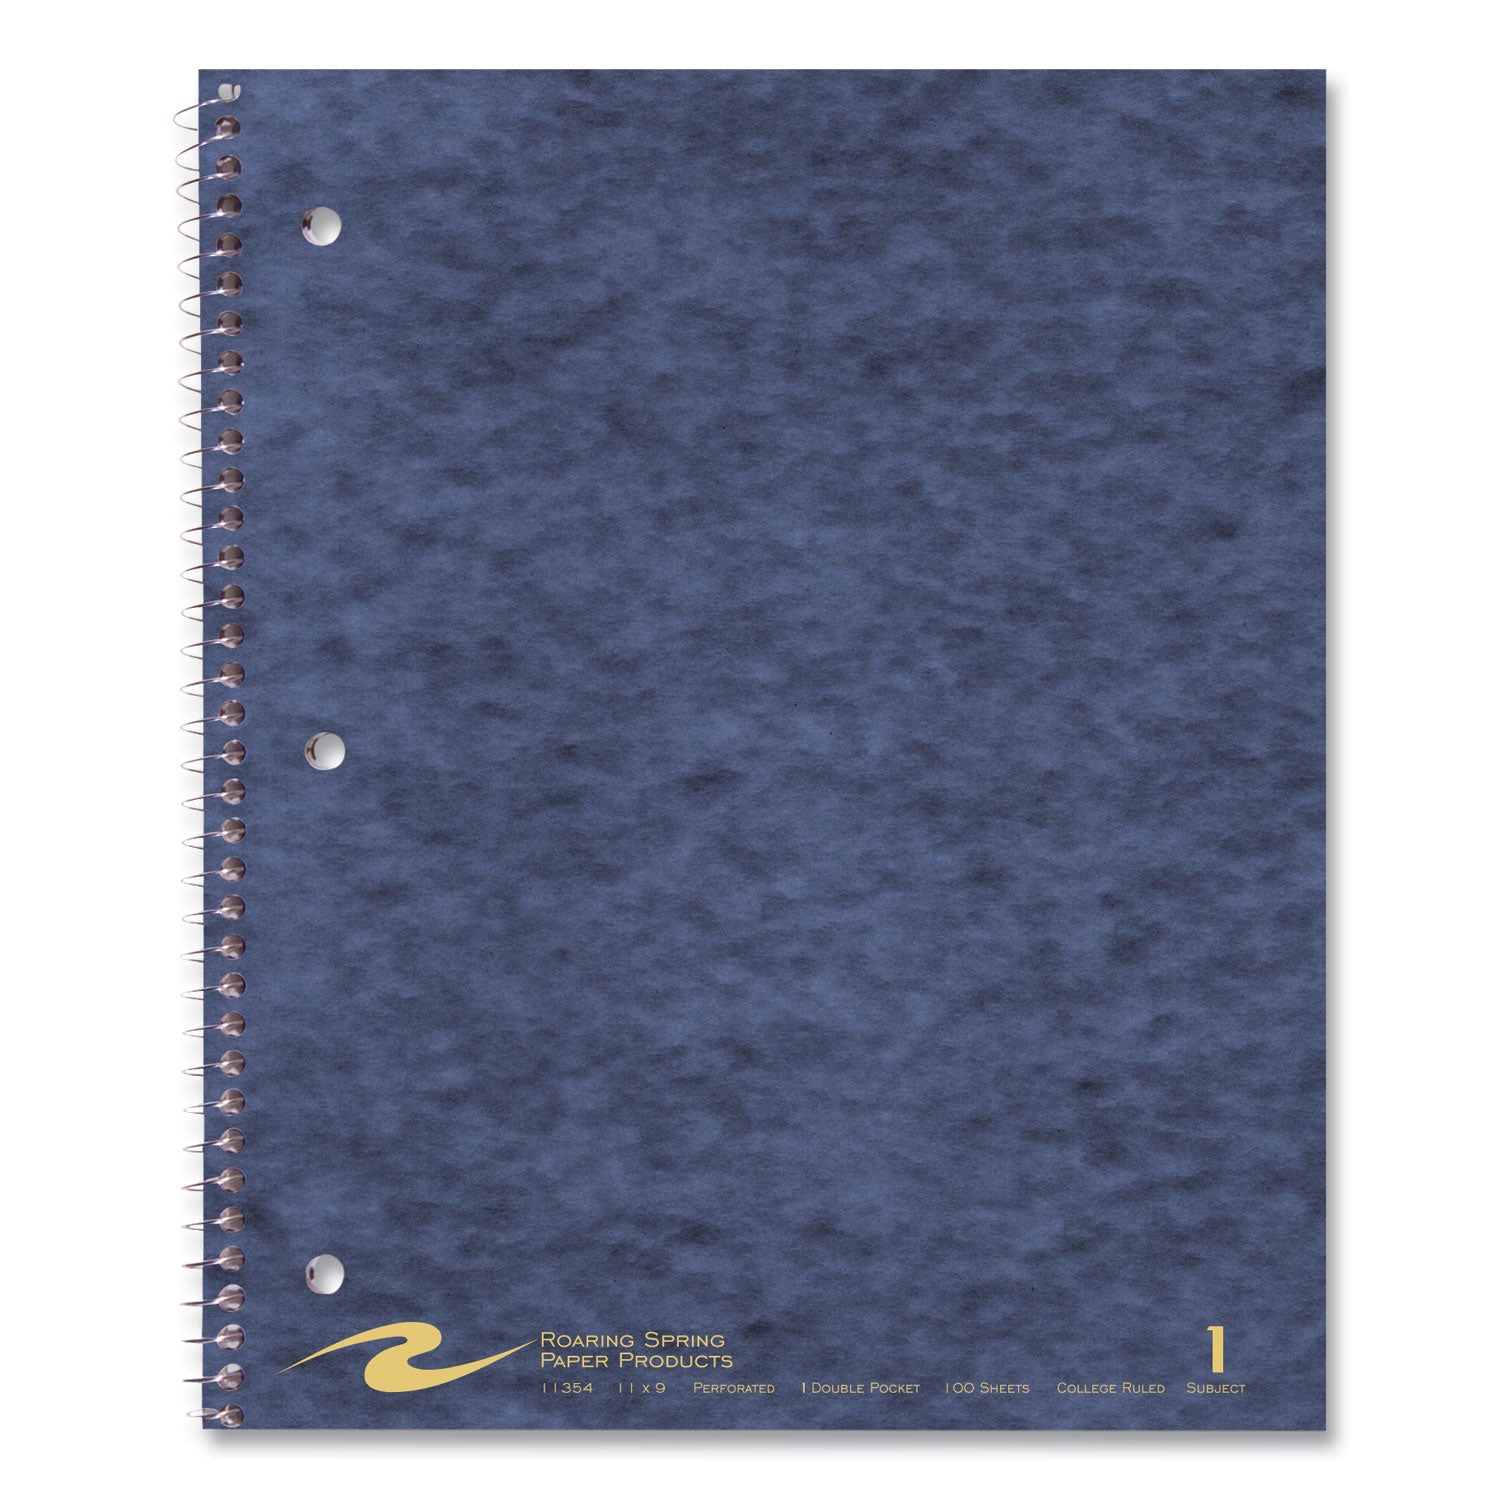 subject-wirebound-notebook-1-subject-med-college-rule-randomly-asst-cover-100-11x9-sheets-24-ct-ships-in-4-6-bus-days_roa11354cs - 2